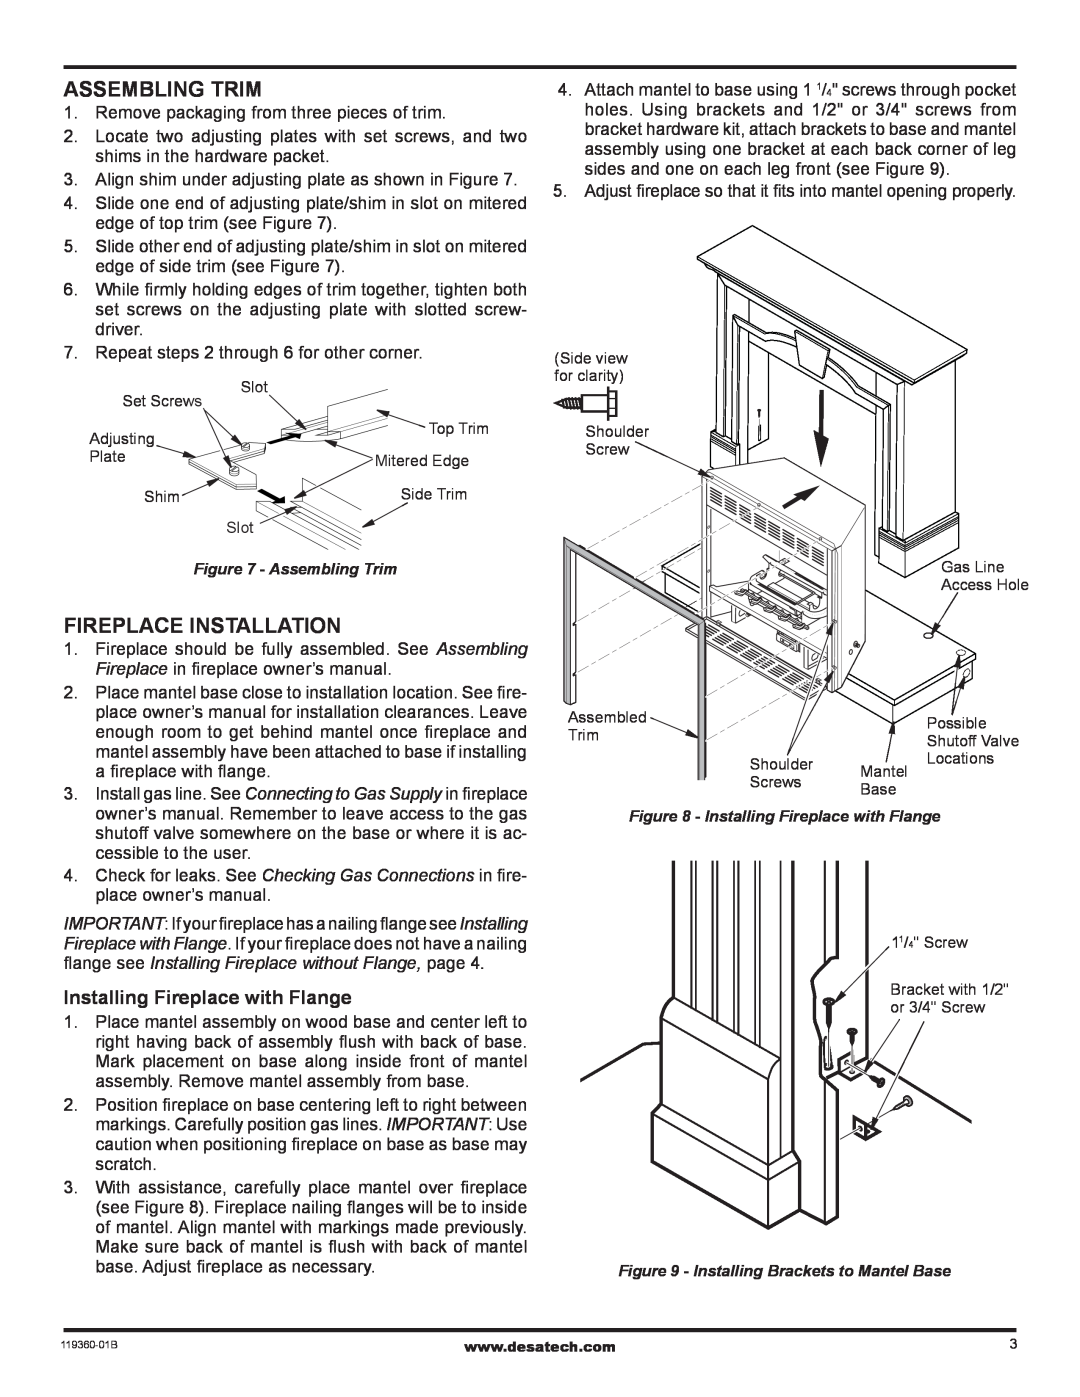 FMI W32DS, W36DS, WS26DS installation instructions Assembling Trim, Fireplace Installation, Installing Fireplace with Flange 